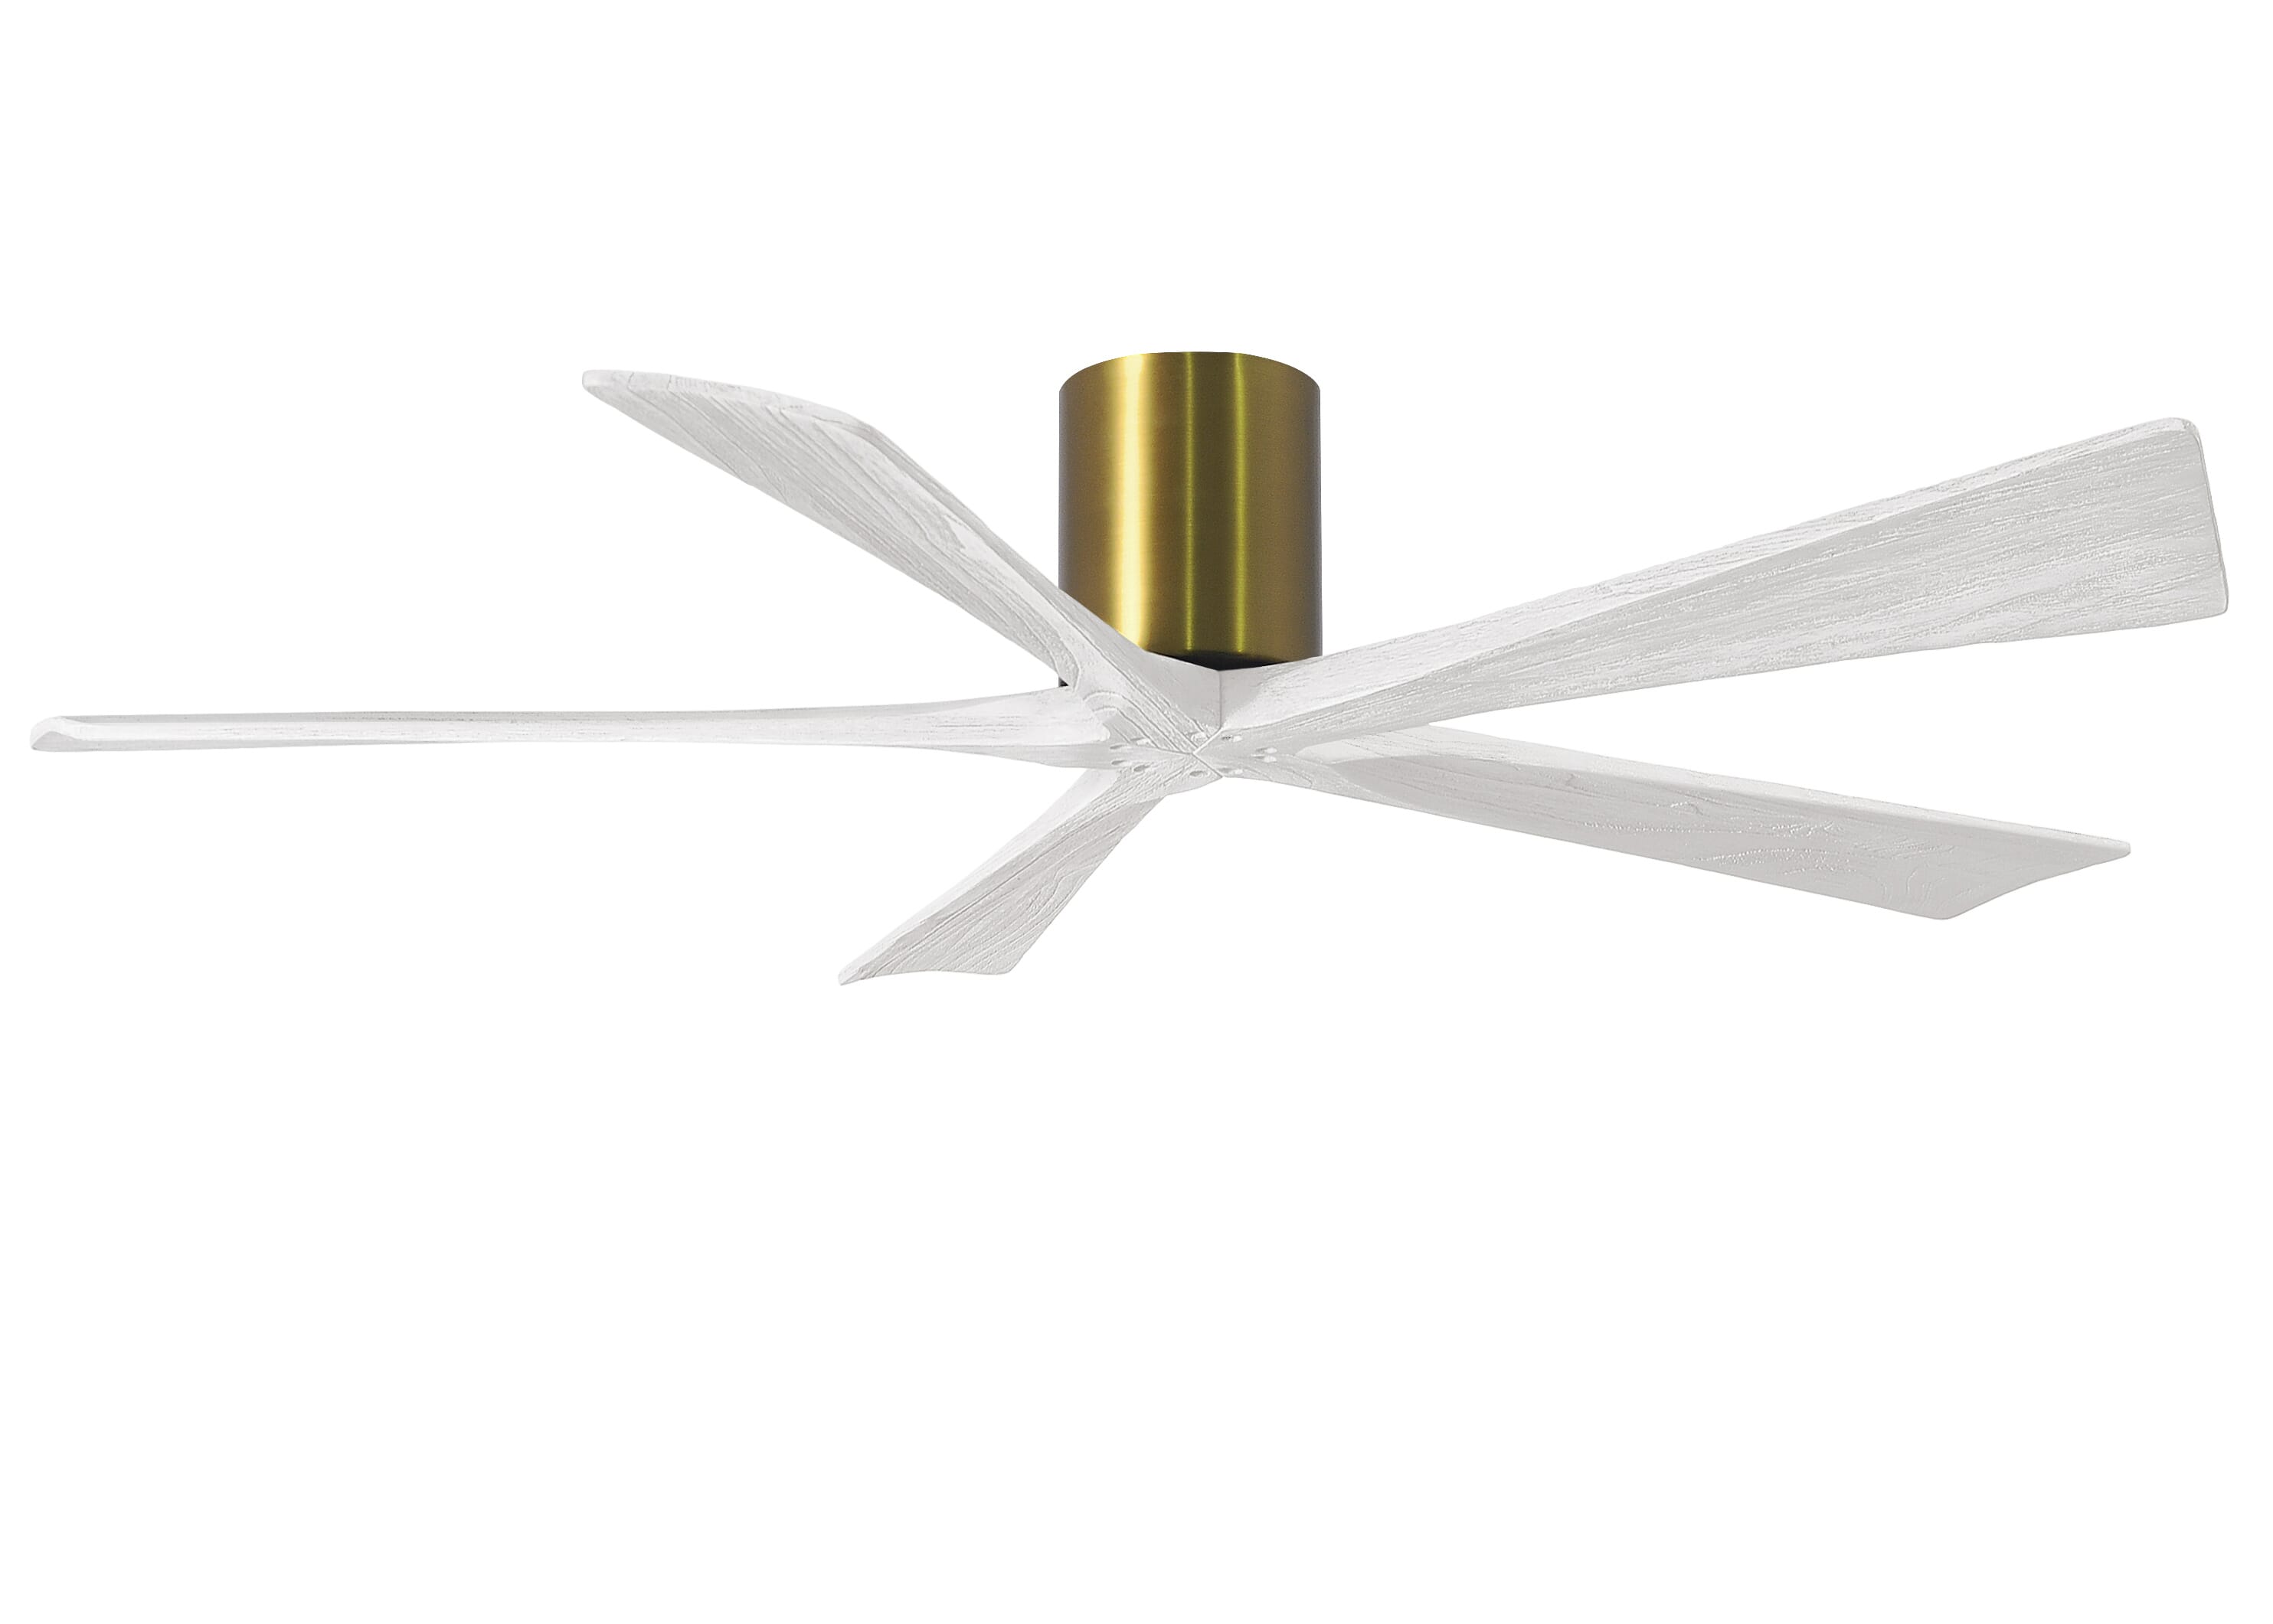 Irene 6-Speed DC 60"" Ceiling Fan in Brushed Brass with Matte White blades -  Matthews Fan Company, IR5H-BRBR-MWH-60